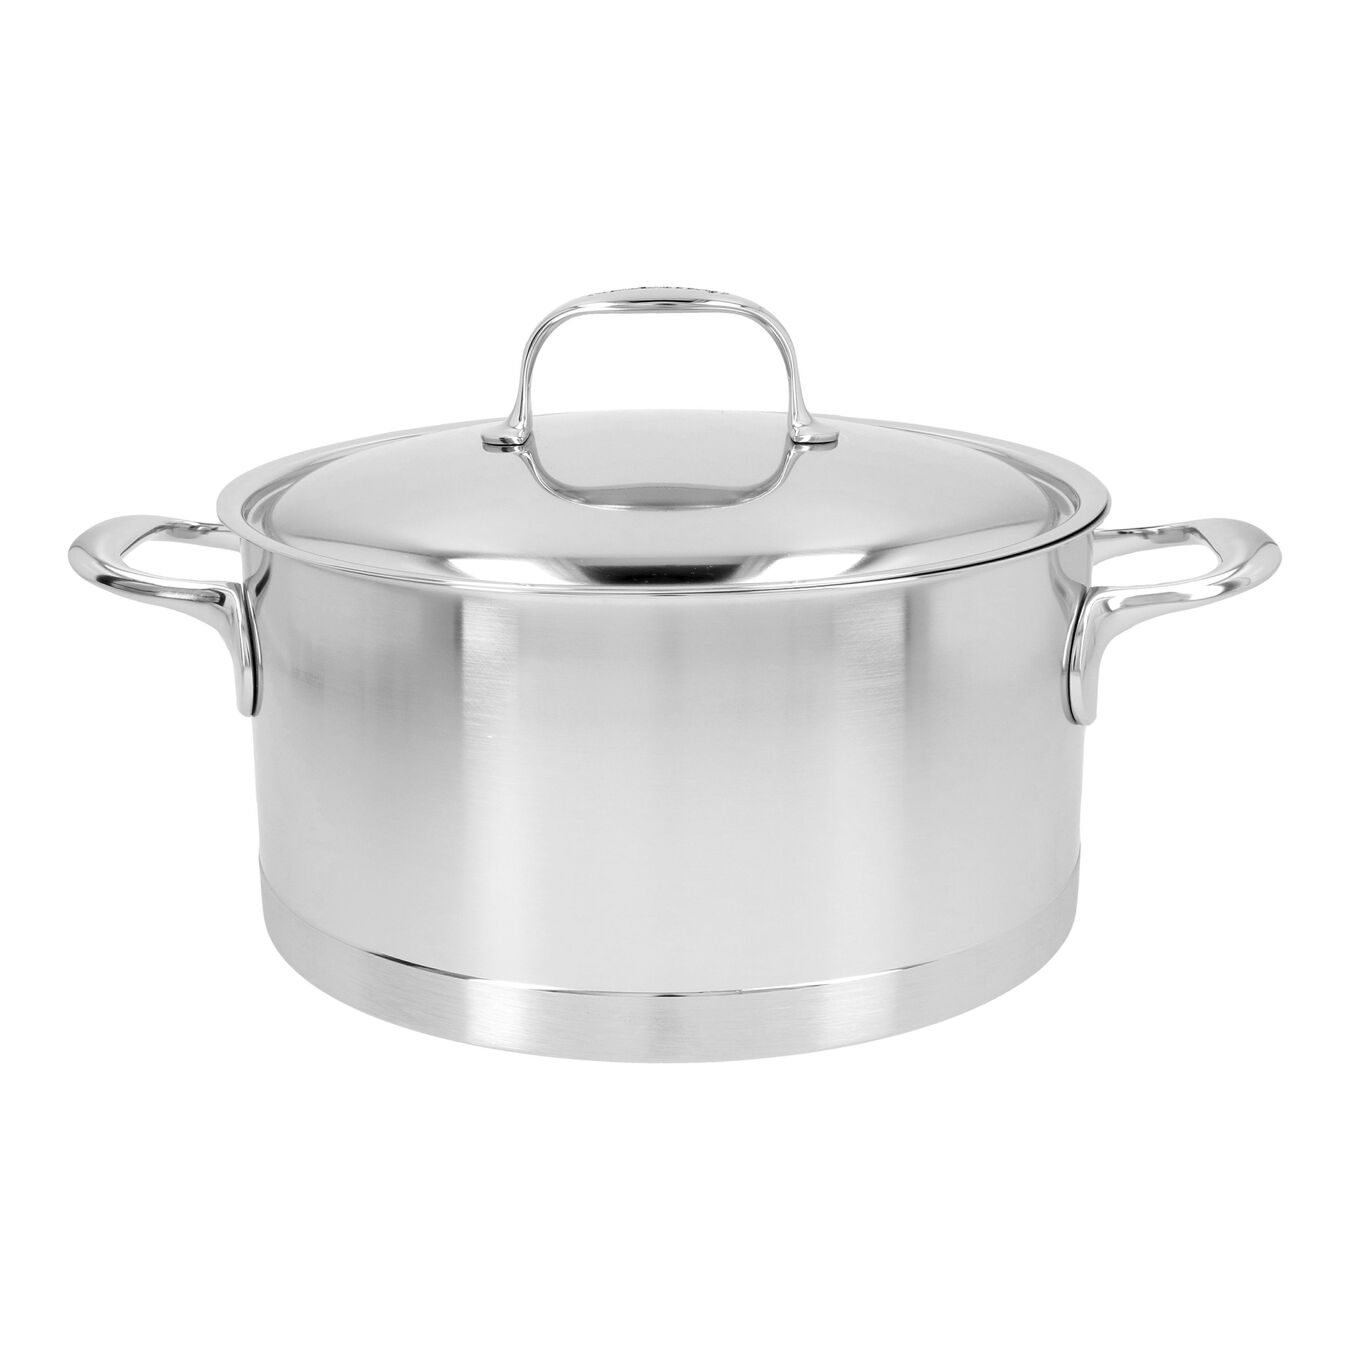 5.5 qt, 18/10 Stainless Steel, Dutch Oven with lid,,large 1